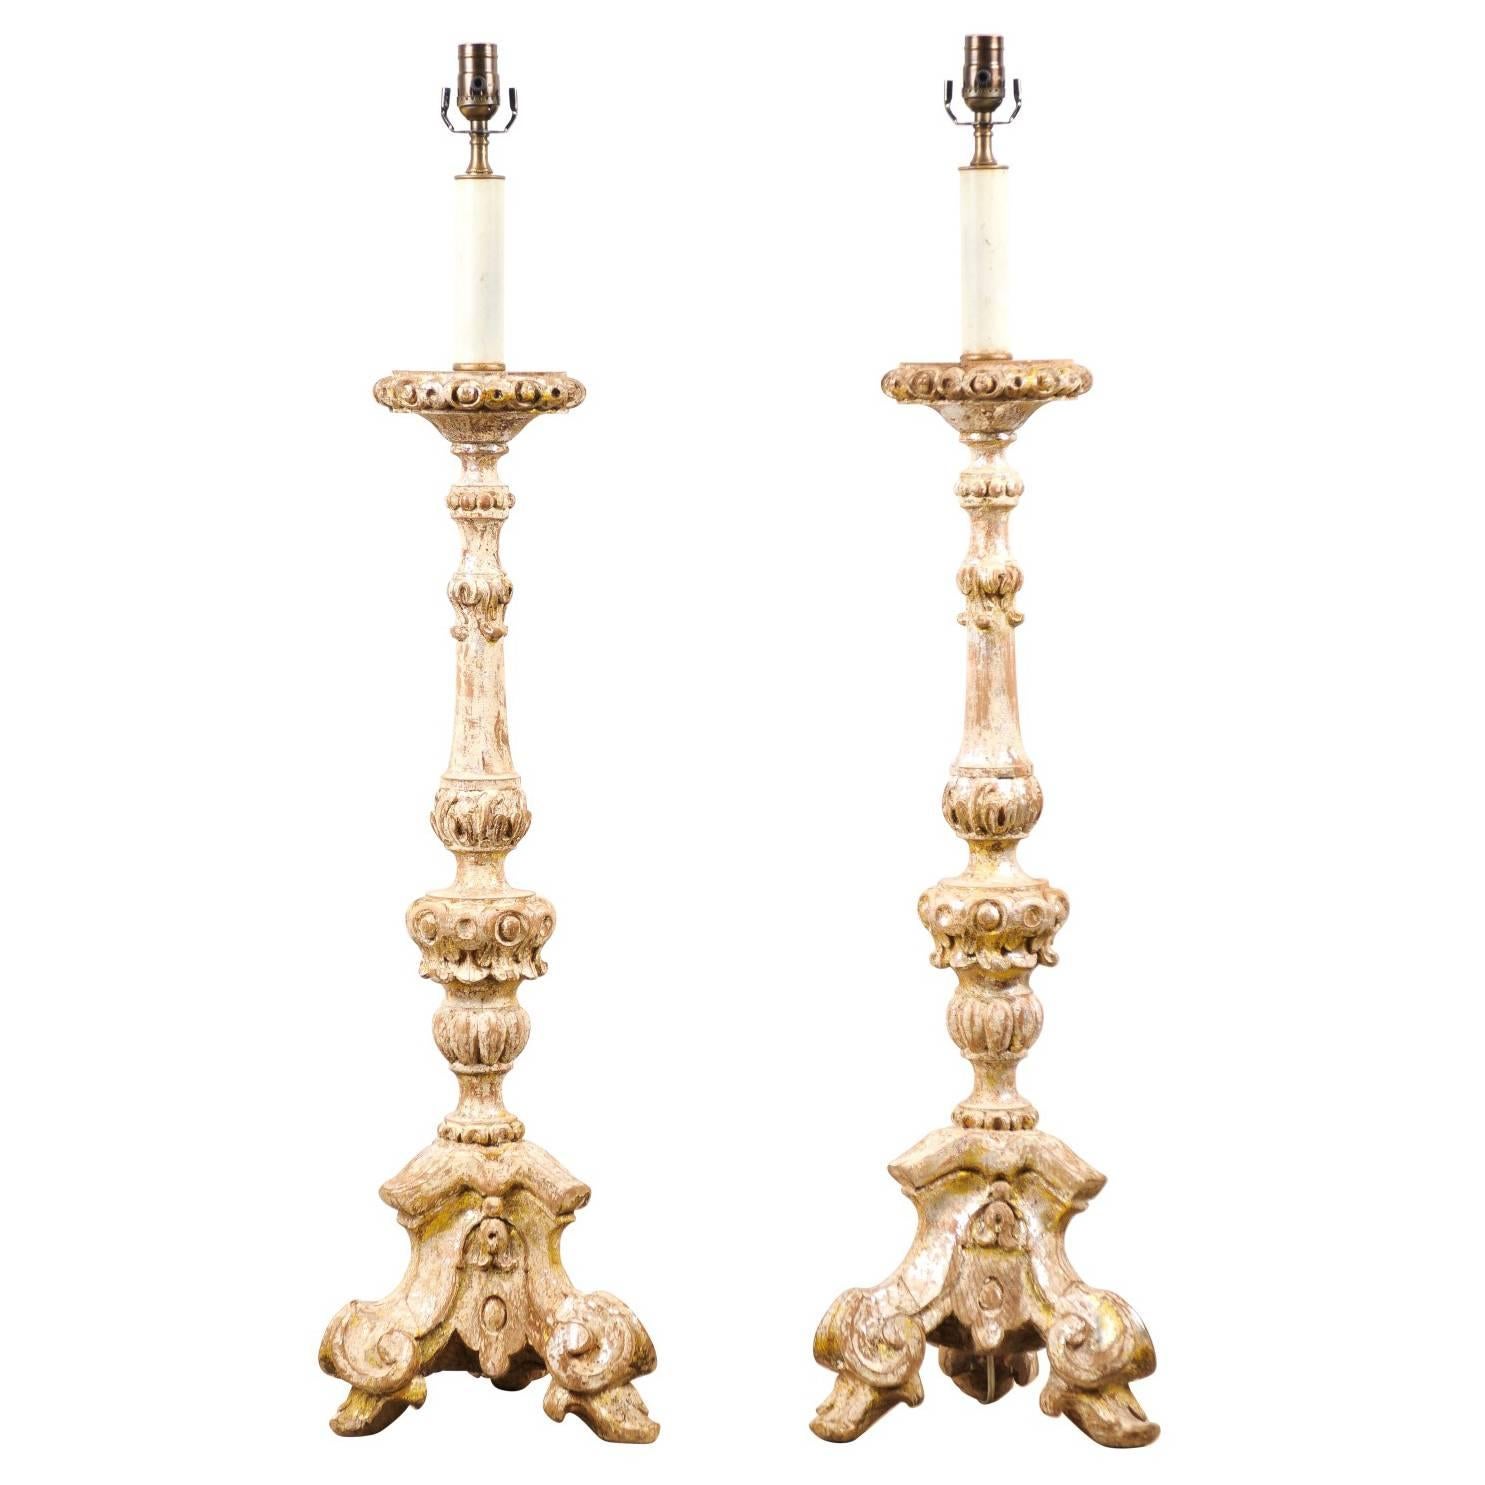 Pair of Table Lamps Made from 19th Century Wood Altar Sticks, Silver Finish